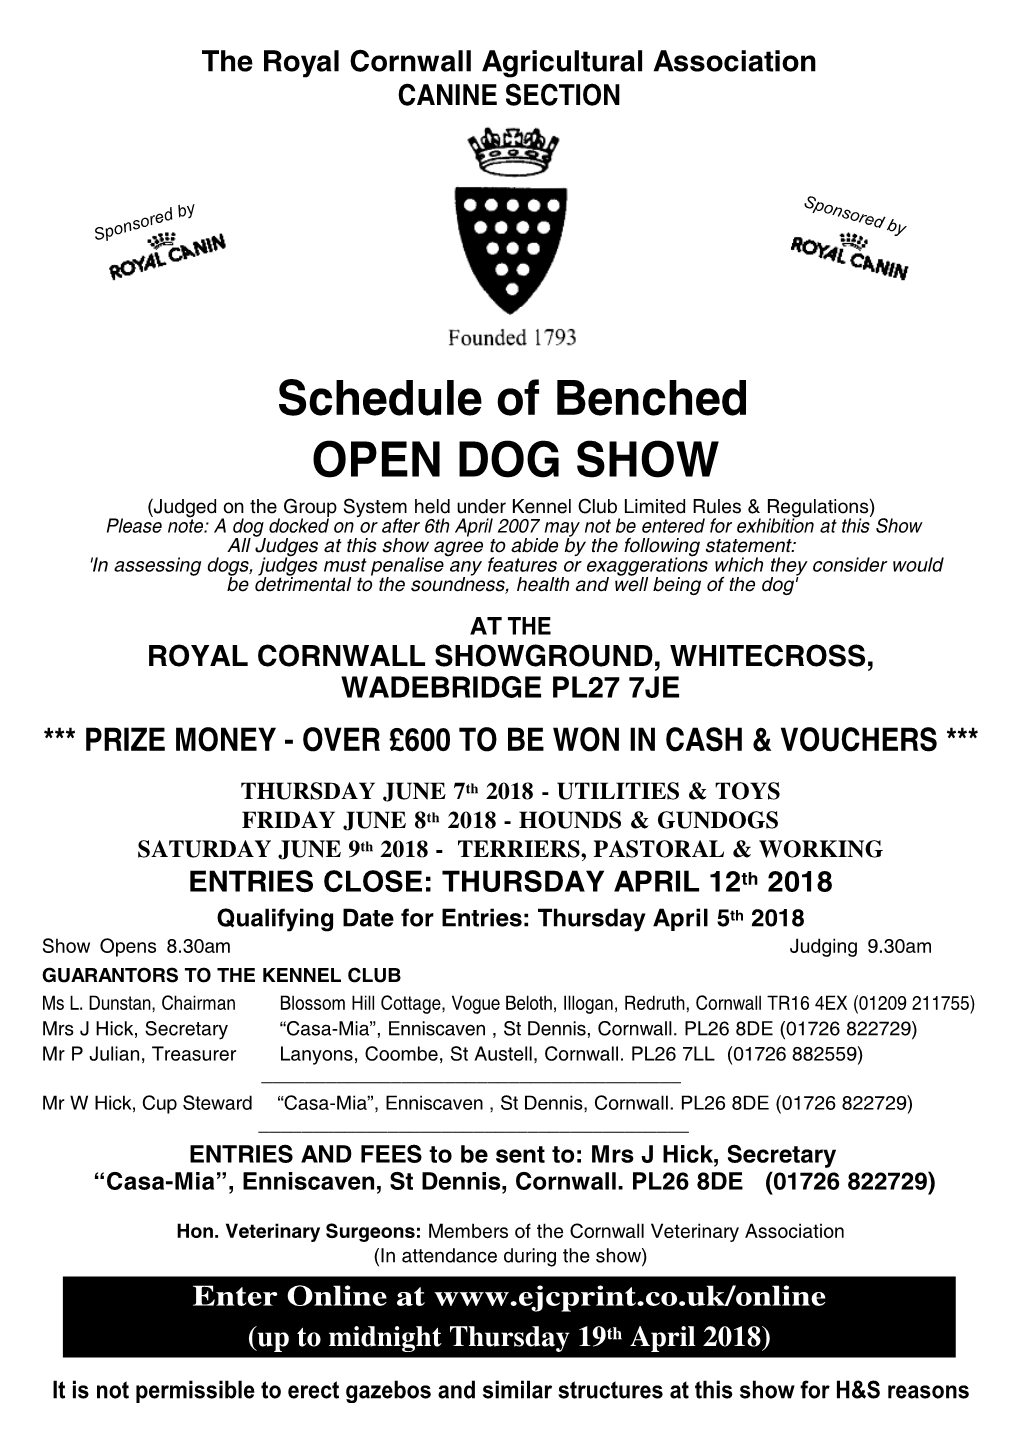 Schedule of Benched OPEN DOG SHOW